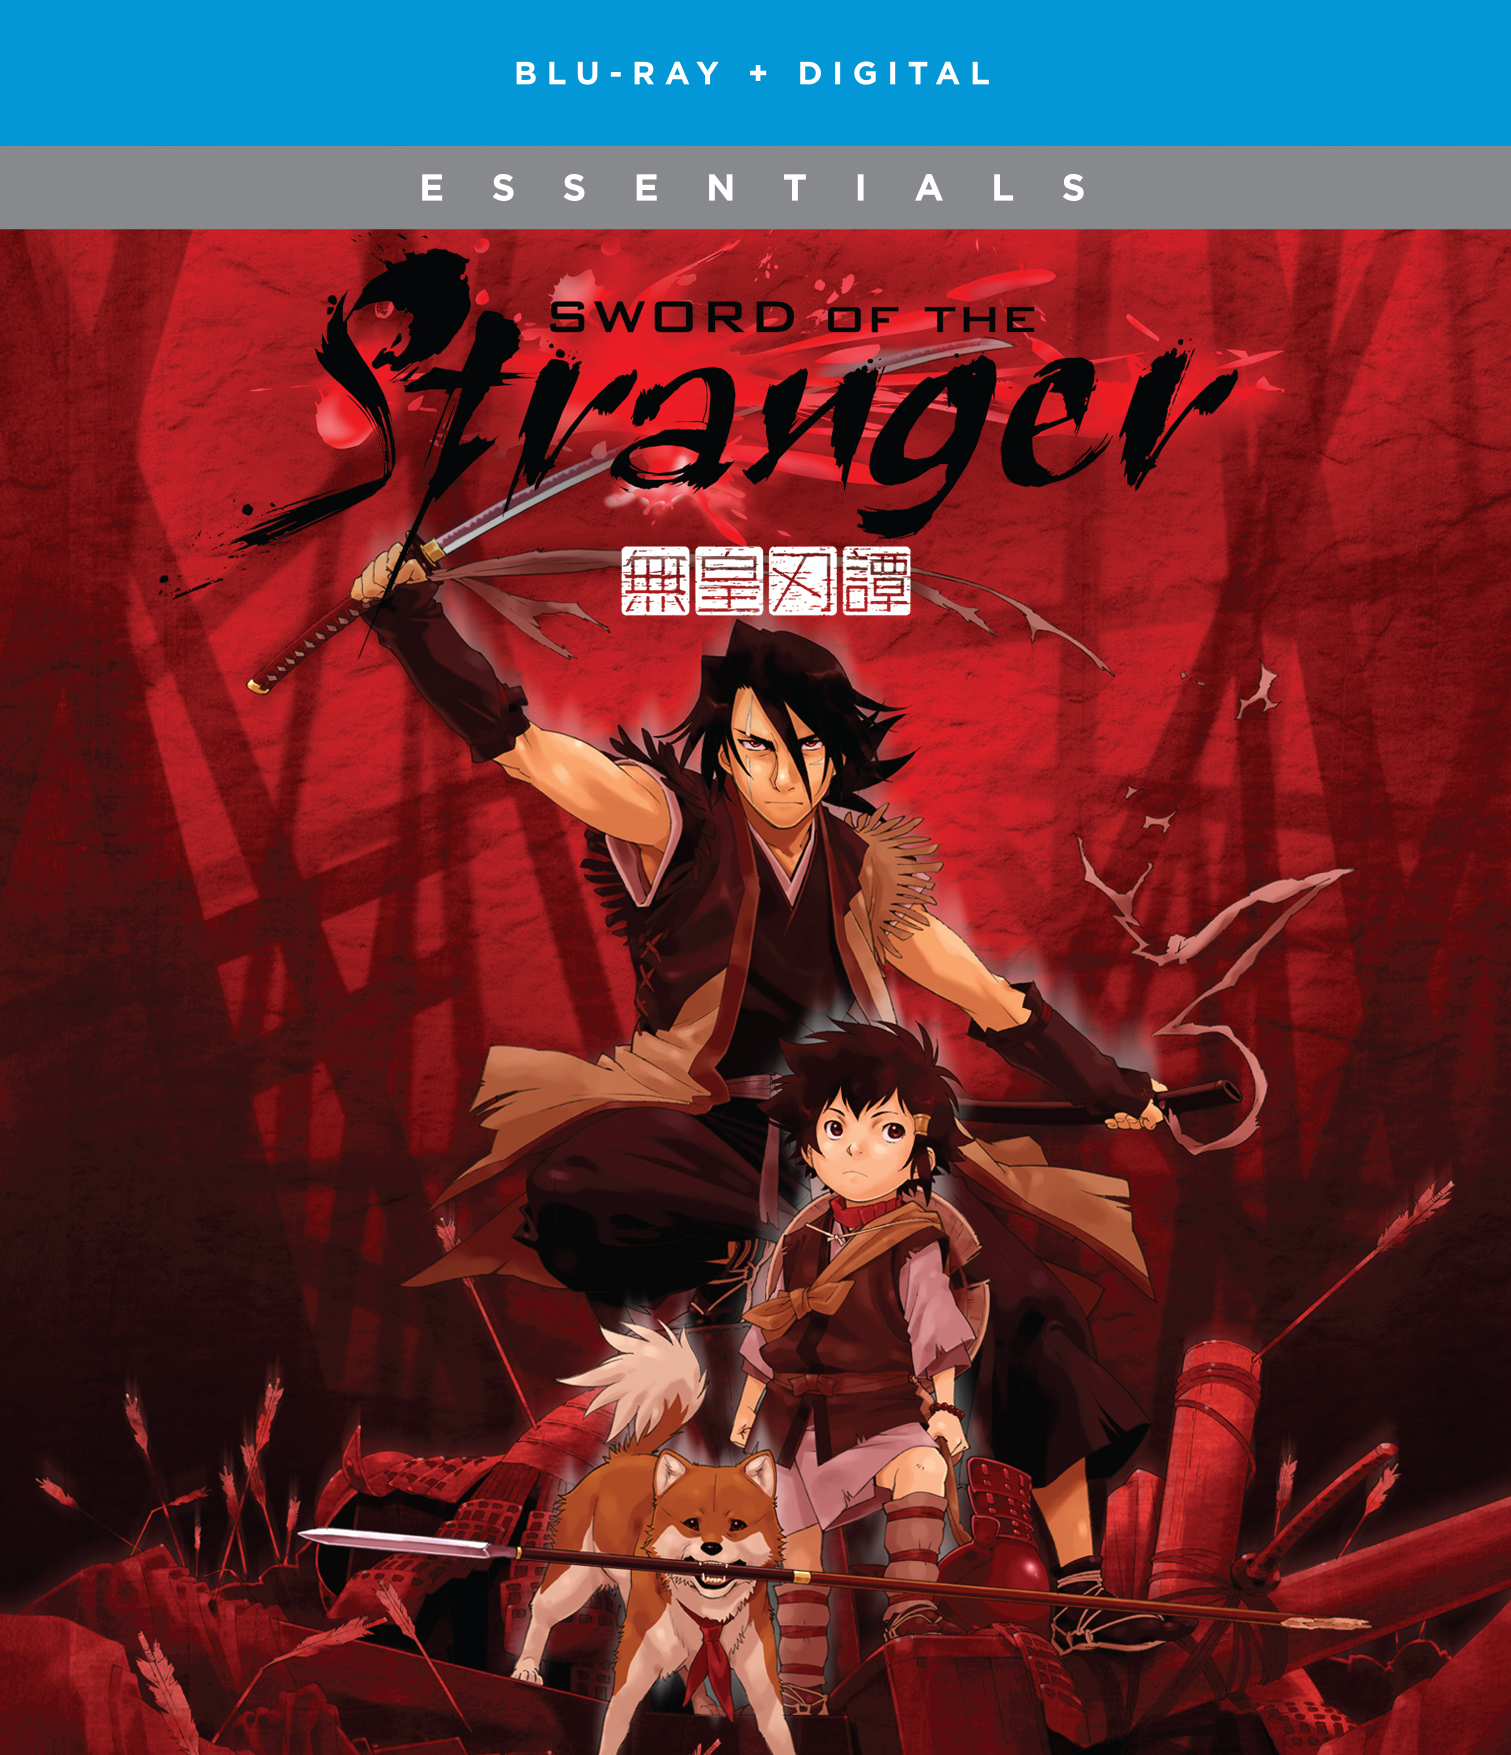 How to watch and stream Sword of the Stranger - 2007 on Roku